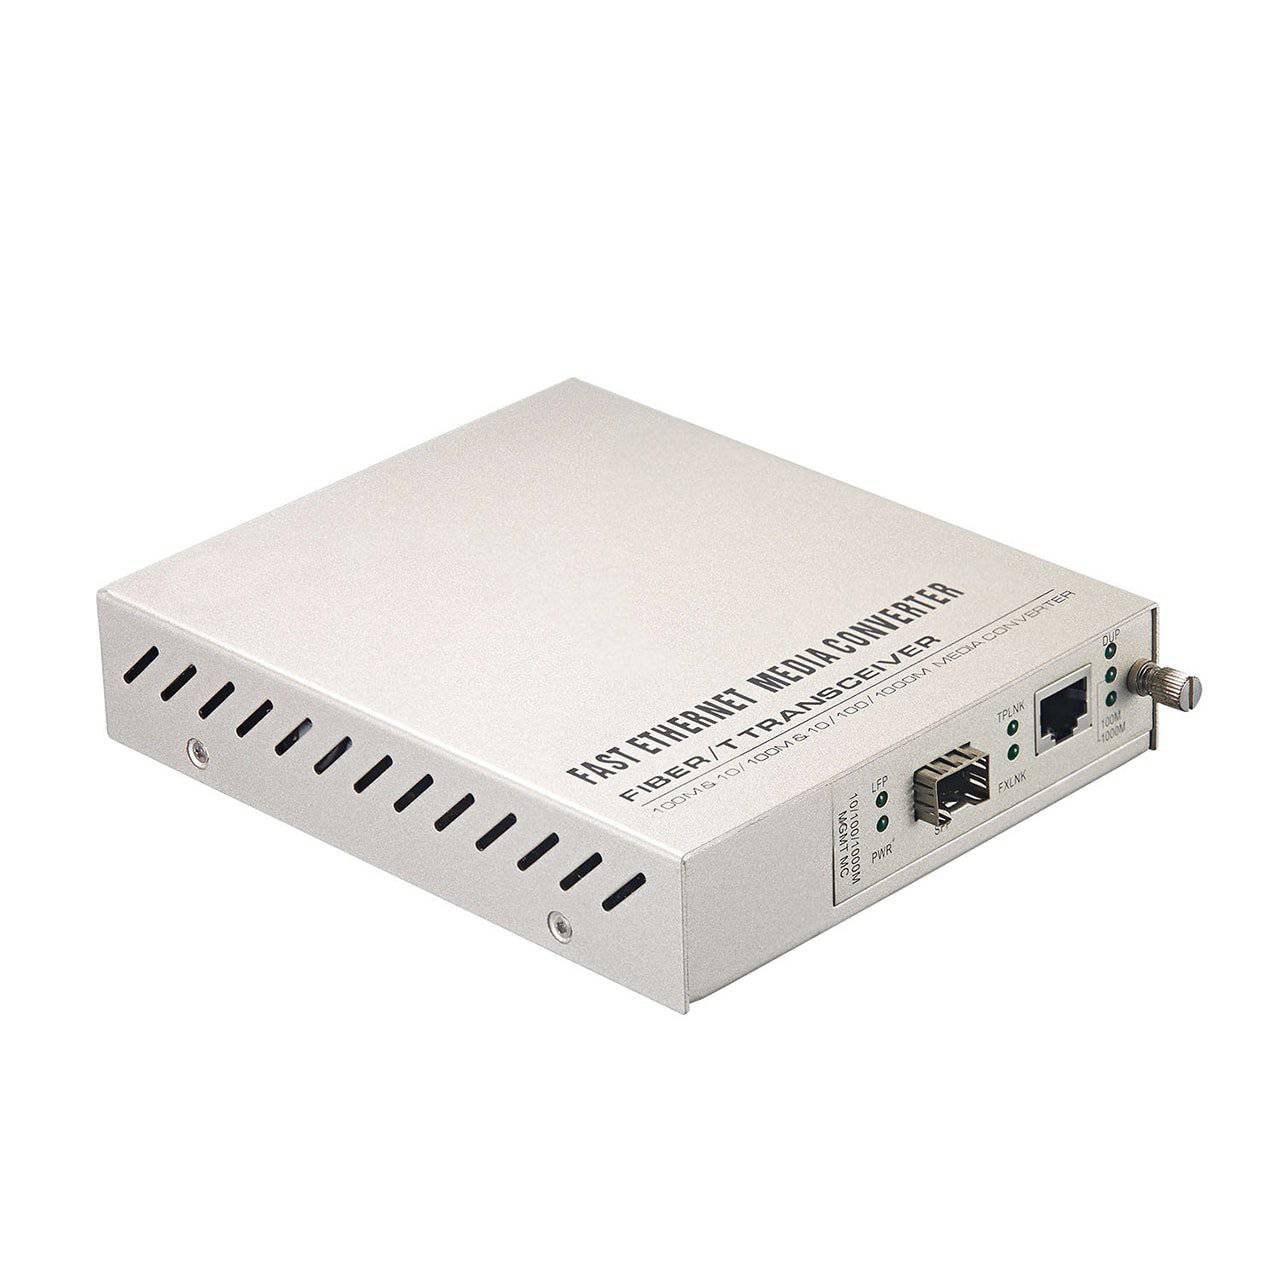 The thumbnail of 10/100/1000Base-TX to 1000Base-FX Managed GbE Media Converter Card